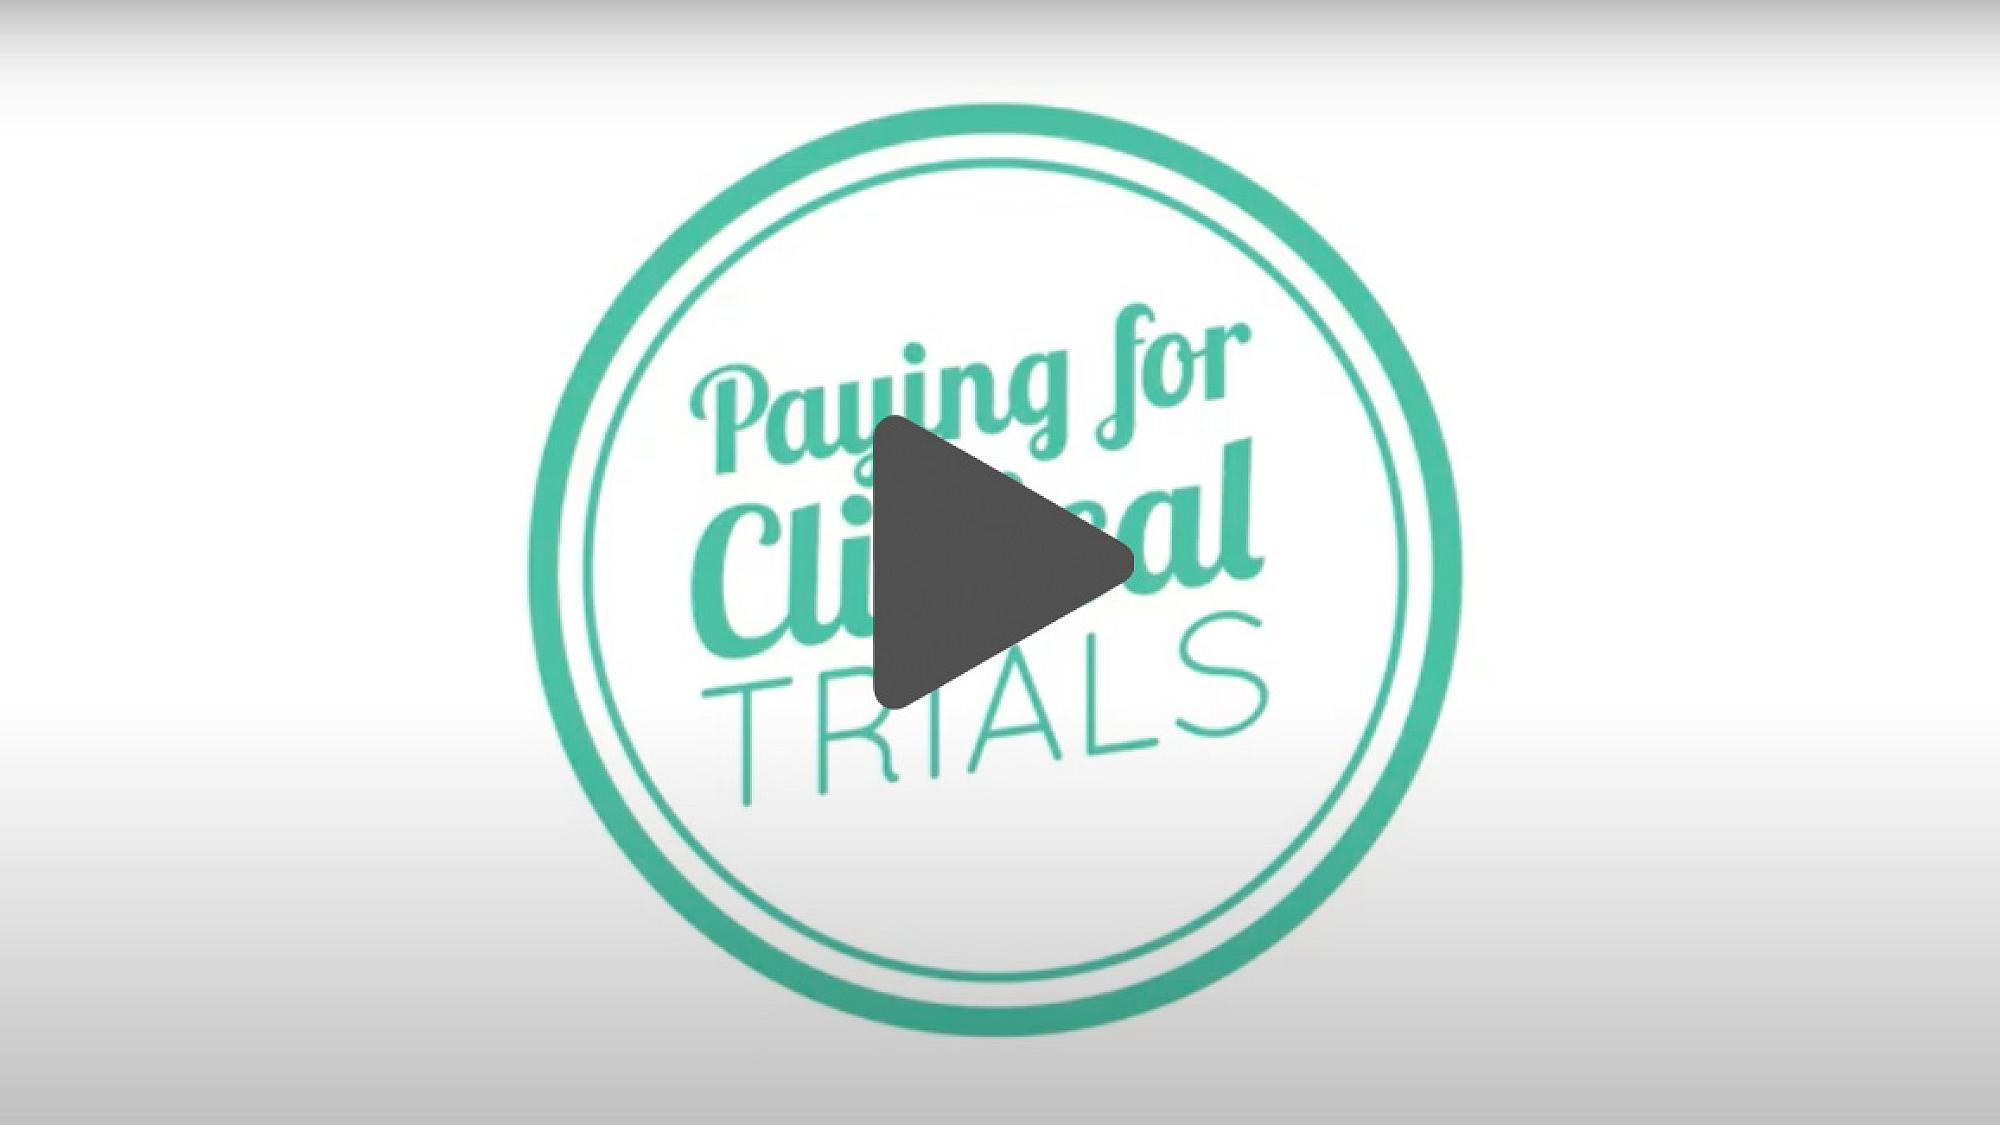 Paying for Clinical Trials screenshot